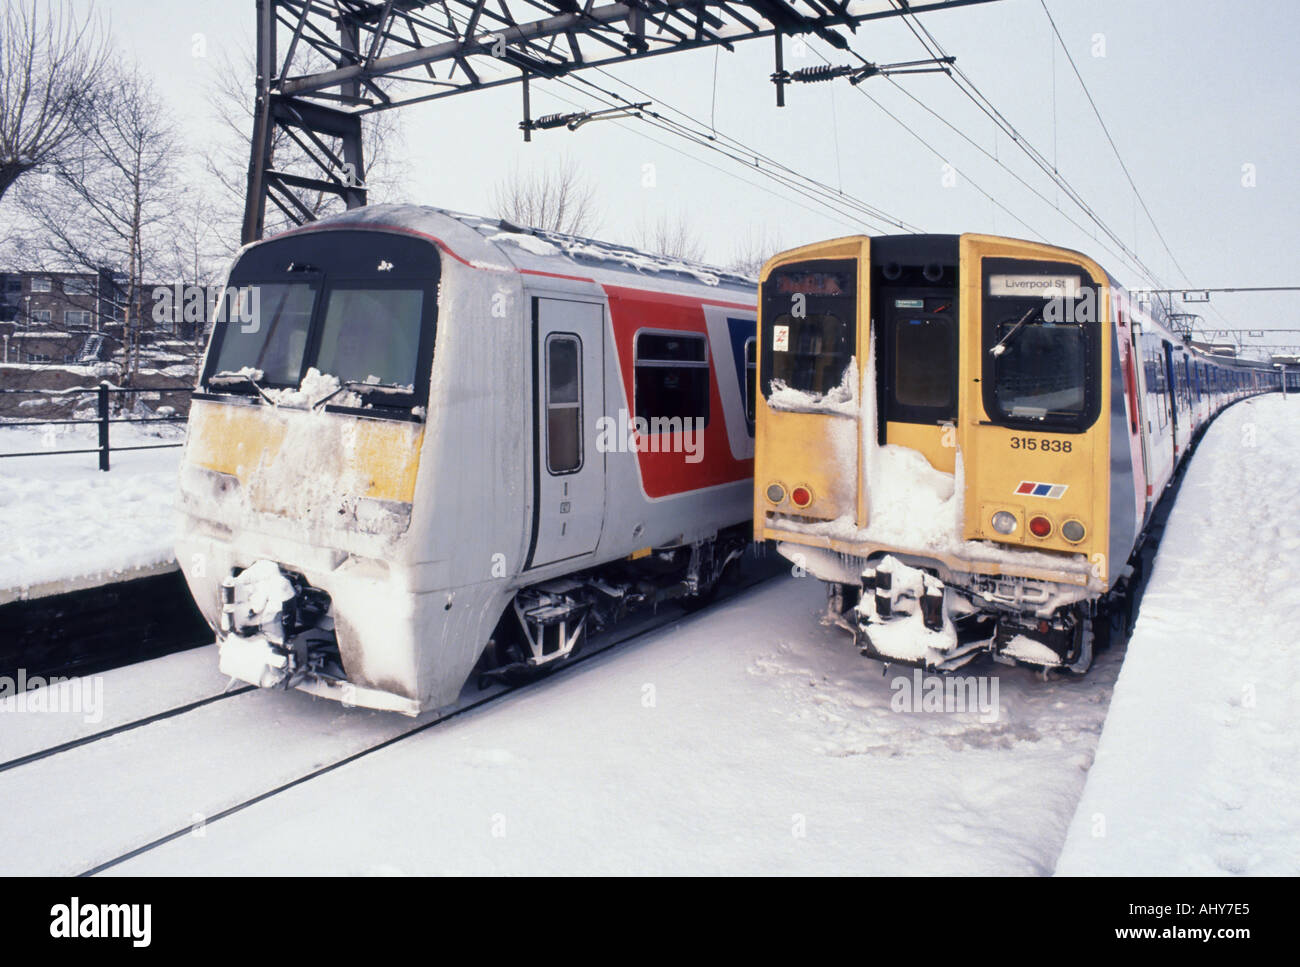 Two snowy computer trains at Shenfield railway station platforms  shortly after snowstorm waiting to travel to London Liverpool Street England UK Stock Photo